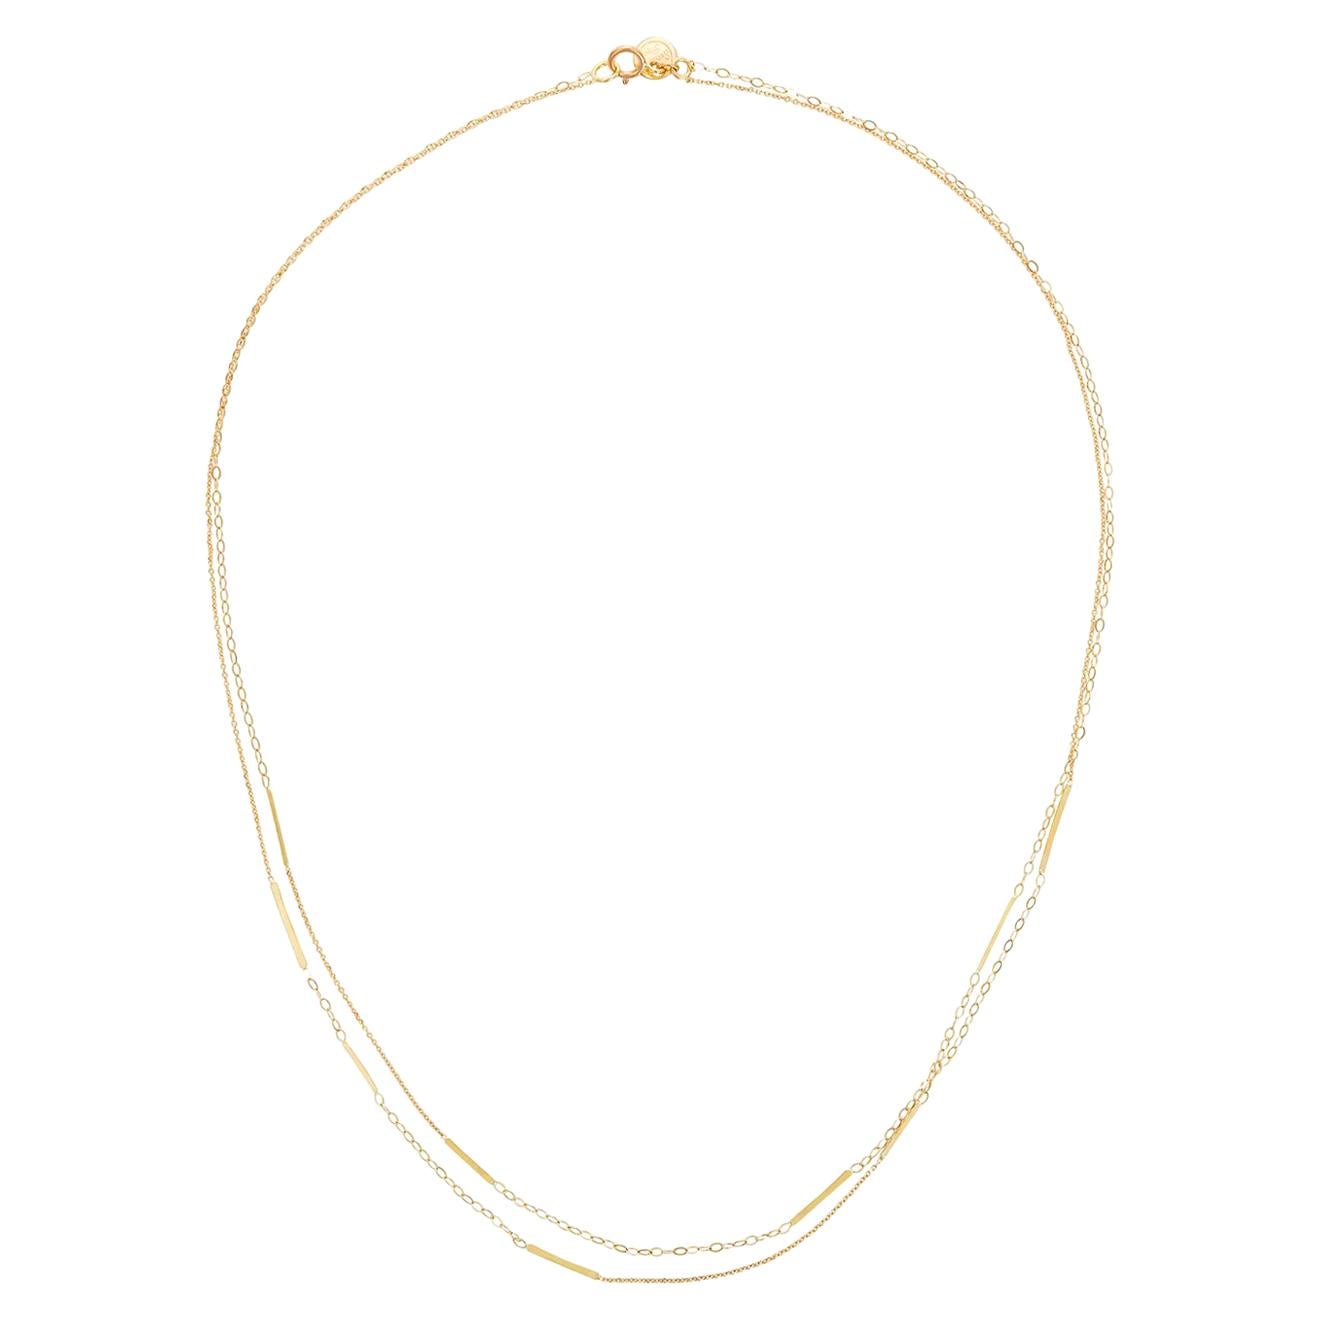 Sweet Pea Sycamore 18 Karat Yellow Gold Double Strand Necklace with Bar Details For Sale